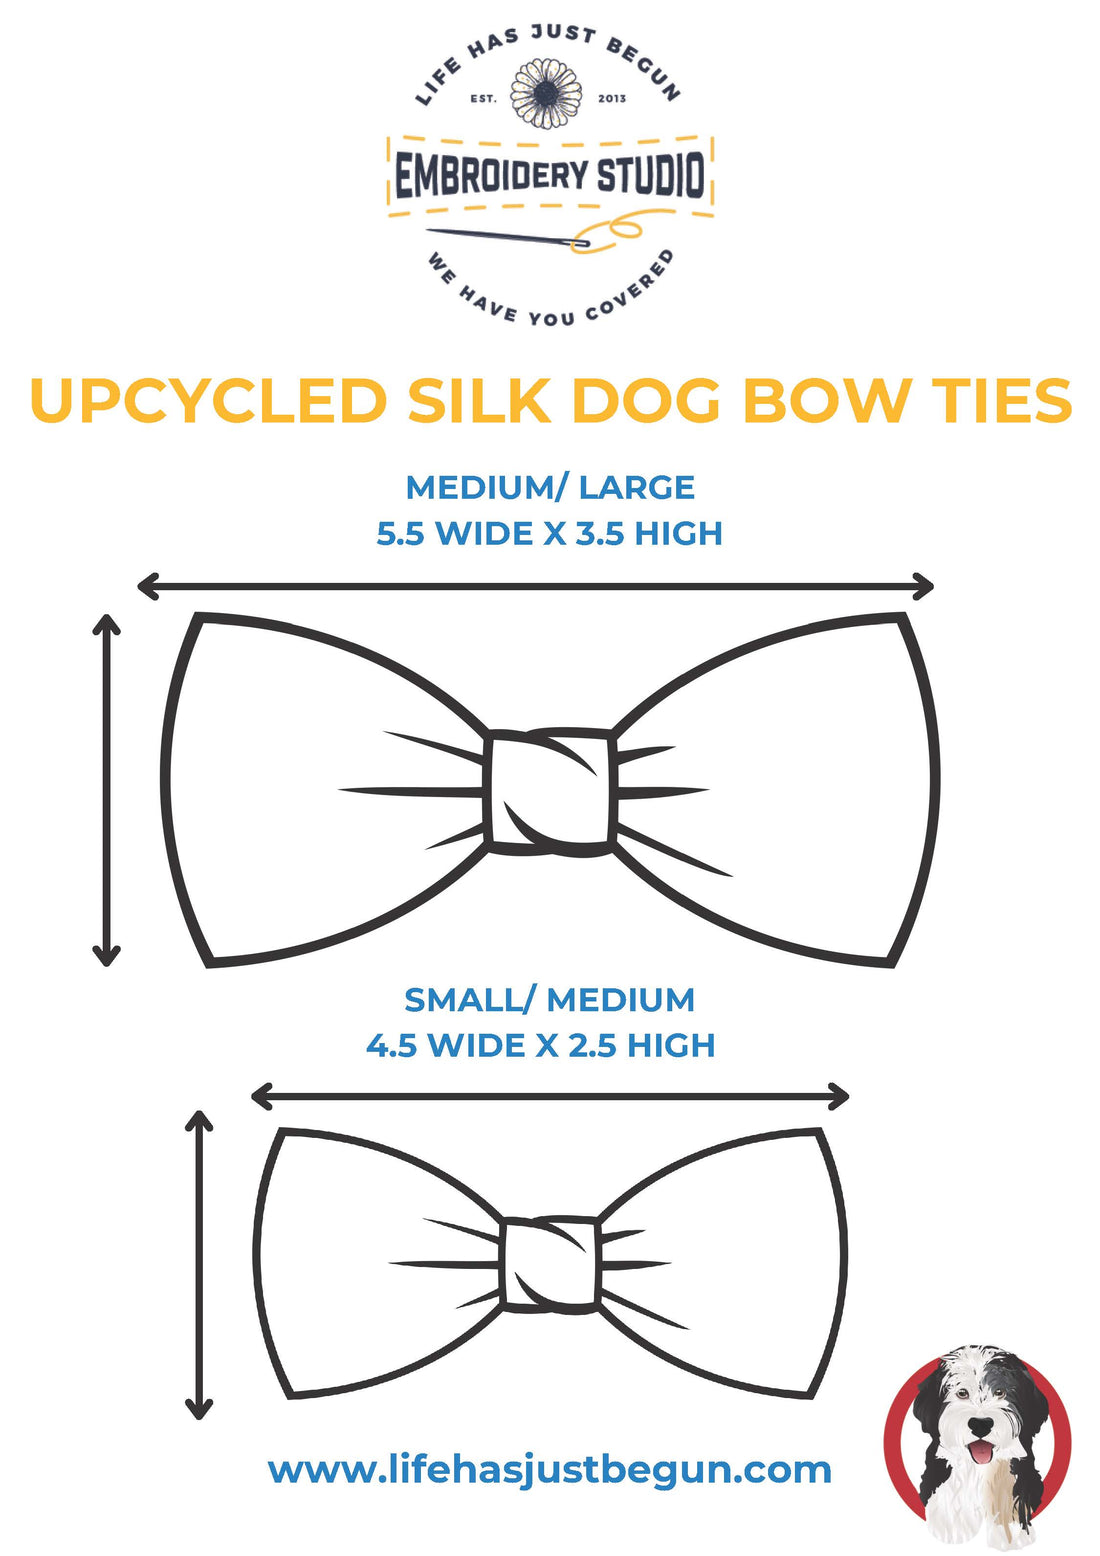 Upcycled silk dog bow tie size chart. Two sizes available. - Life Has Just Begun